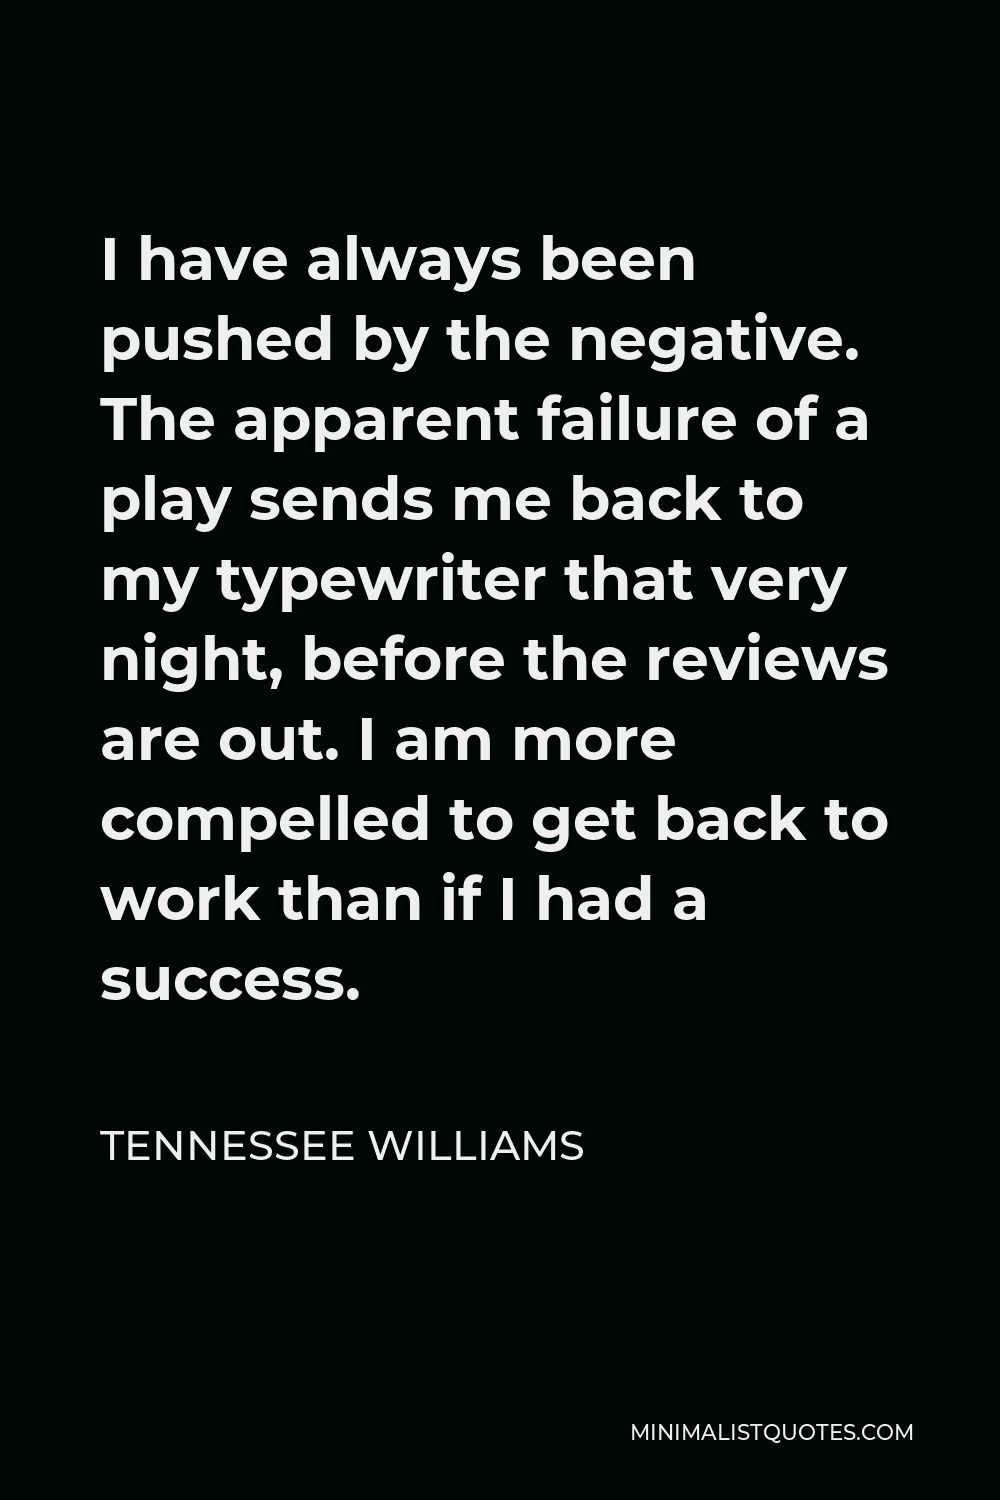 Tennessee Williams Quote - I have always been pushed by the negative. The apparent failure of a play sends me back to my typewriter that very night, before the reviews are out. I am more compelled to get back to work than if I had a success.